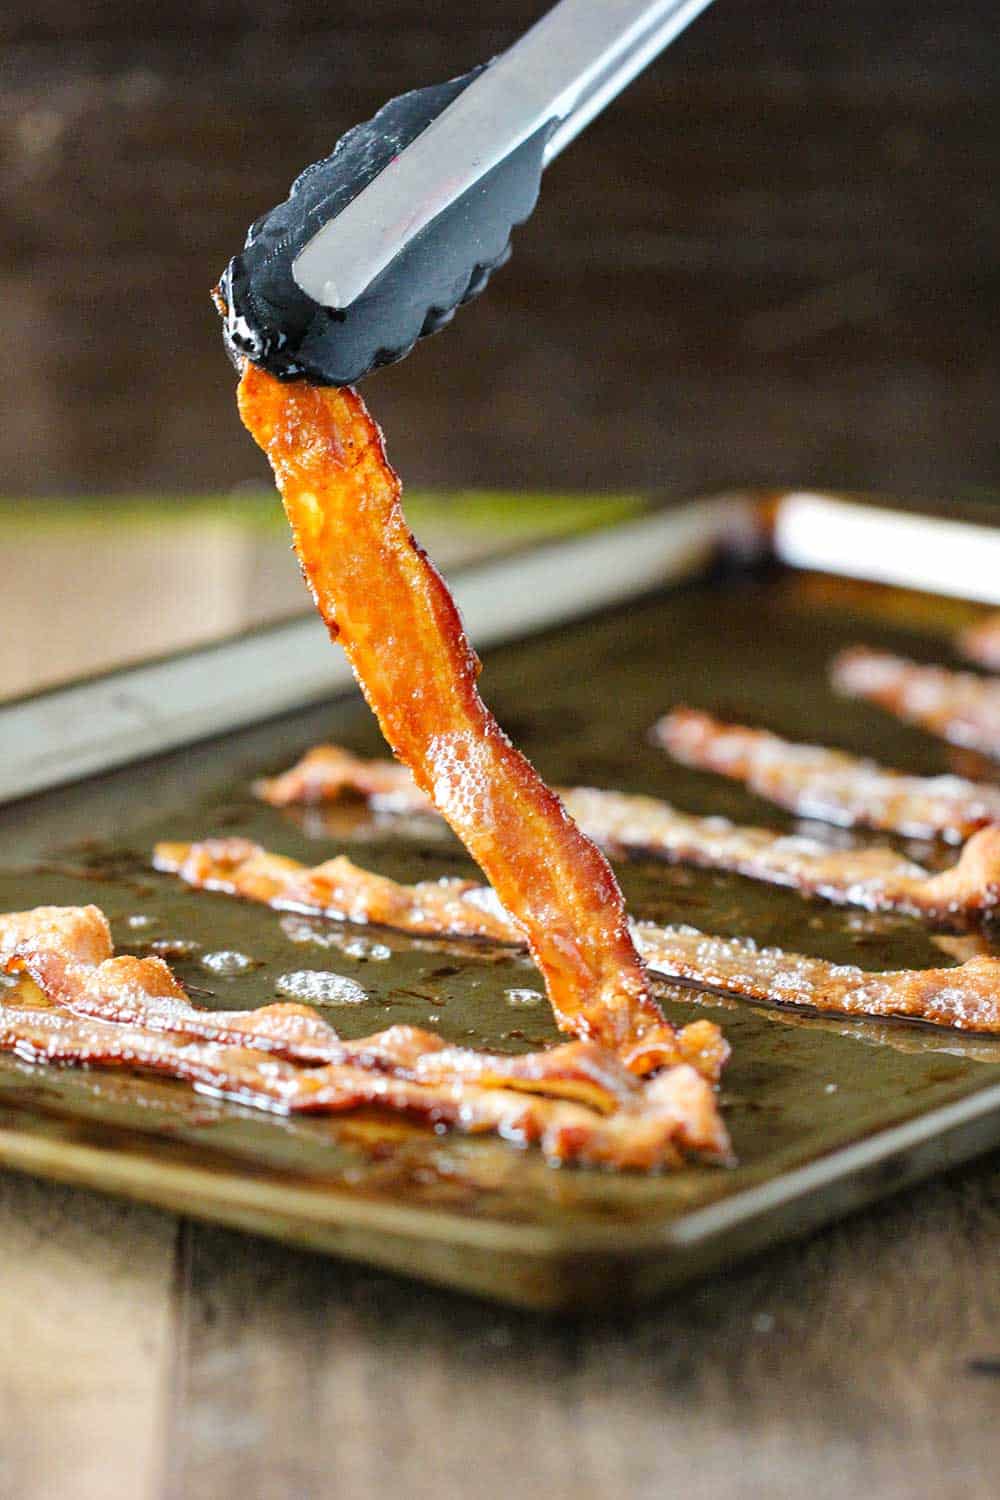 A pair of tongs lifting up a strip of cooked bacon from a baking sheet. 